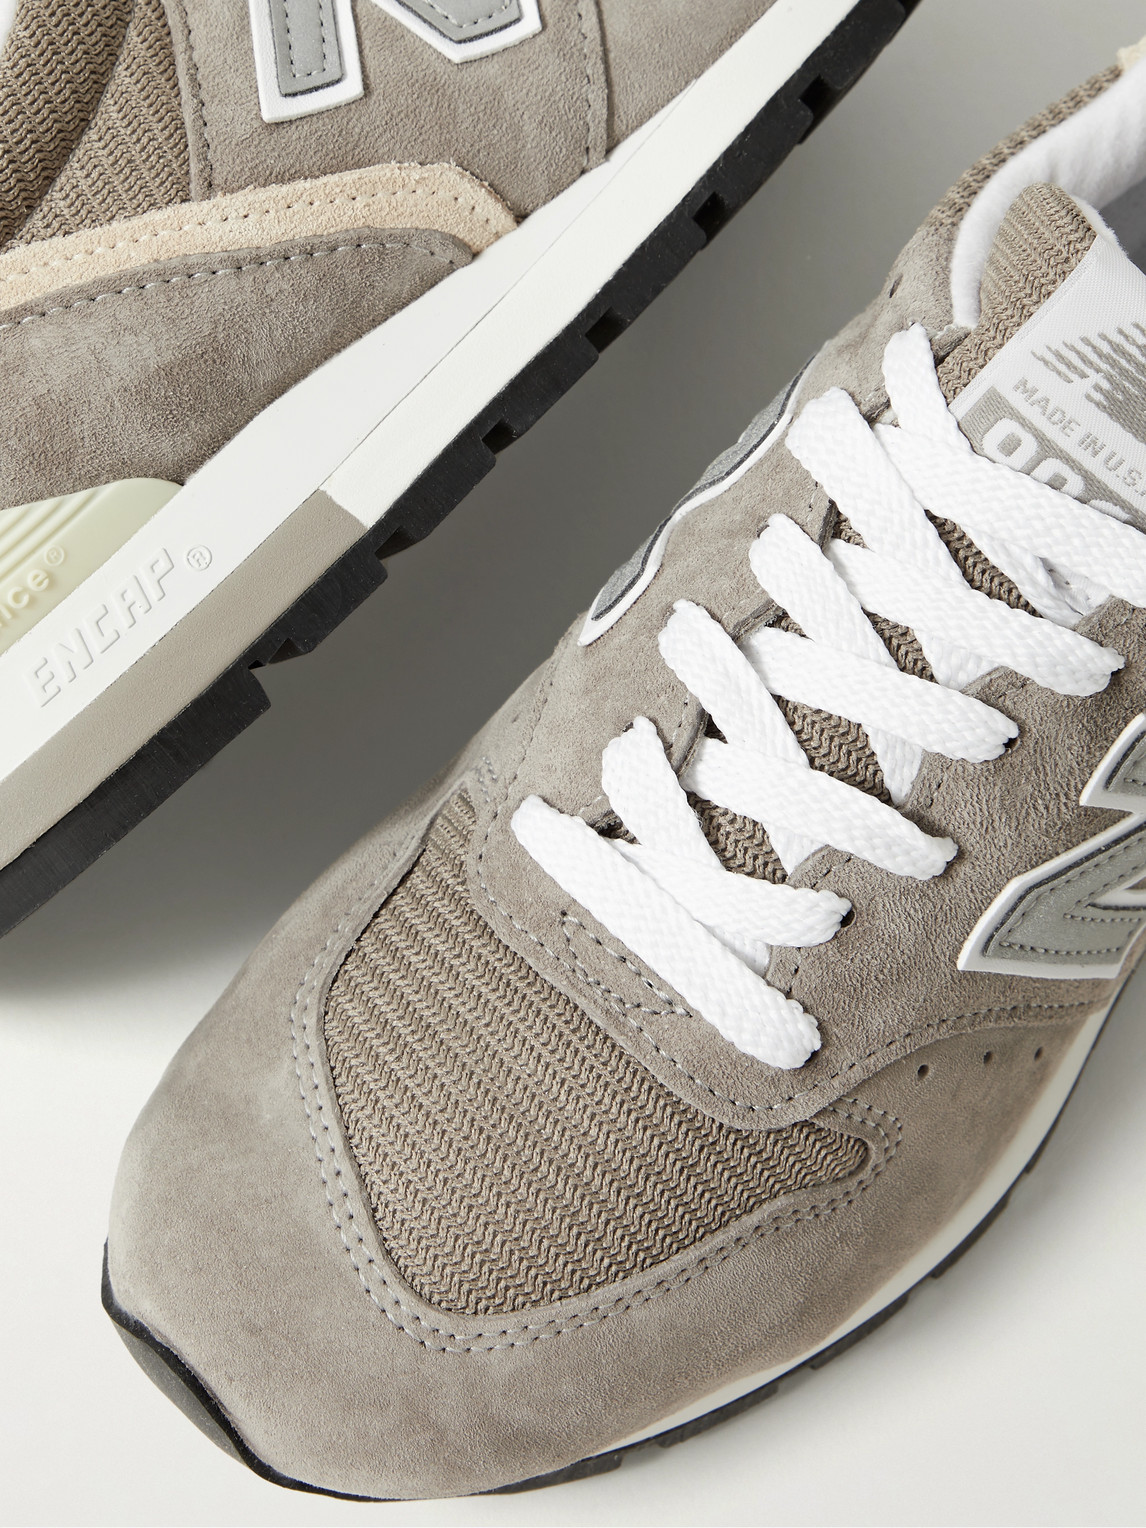 New Balance 996 Suede and Mesh Sneakers | Smart Closet